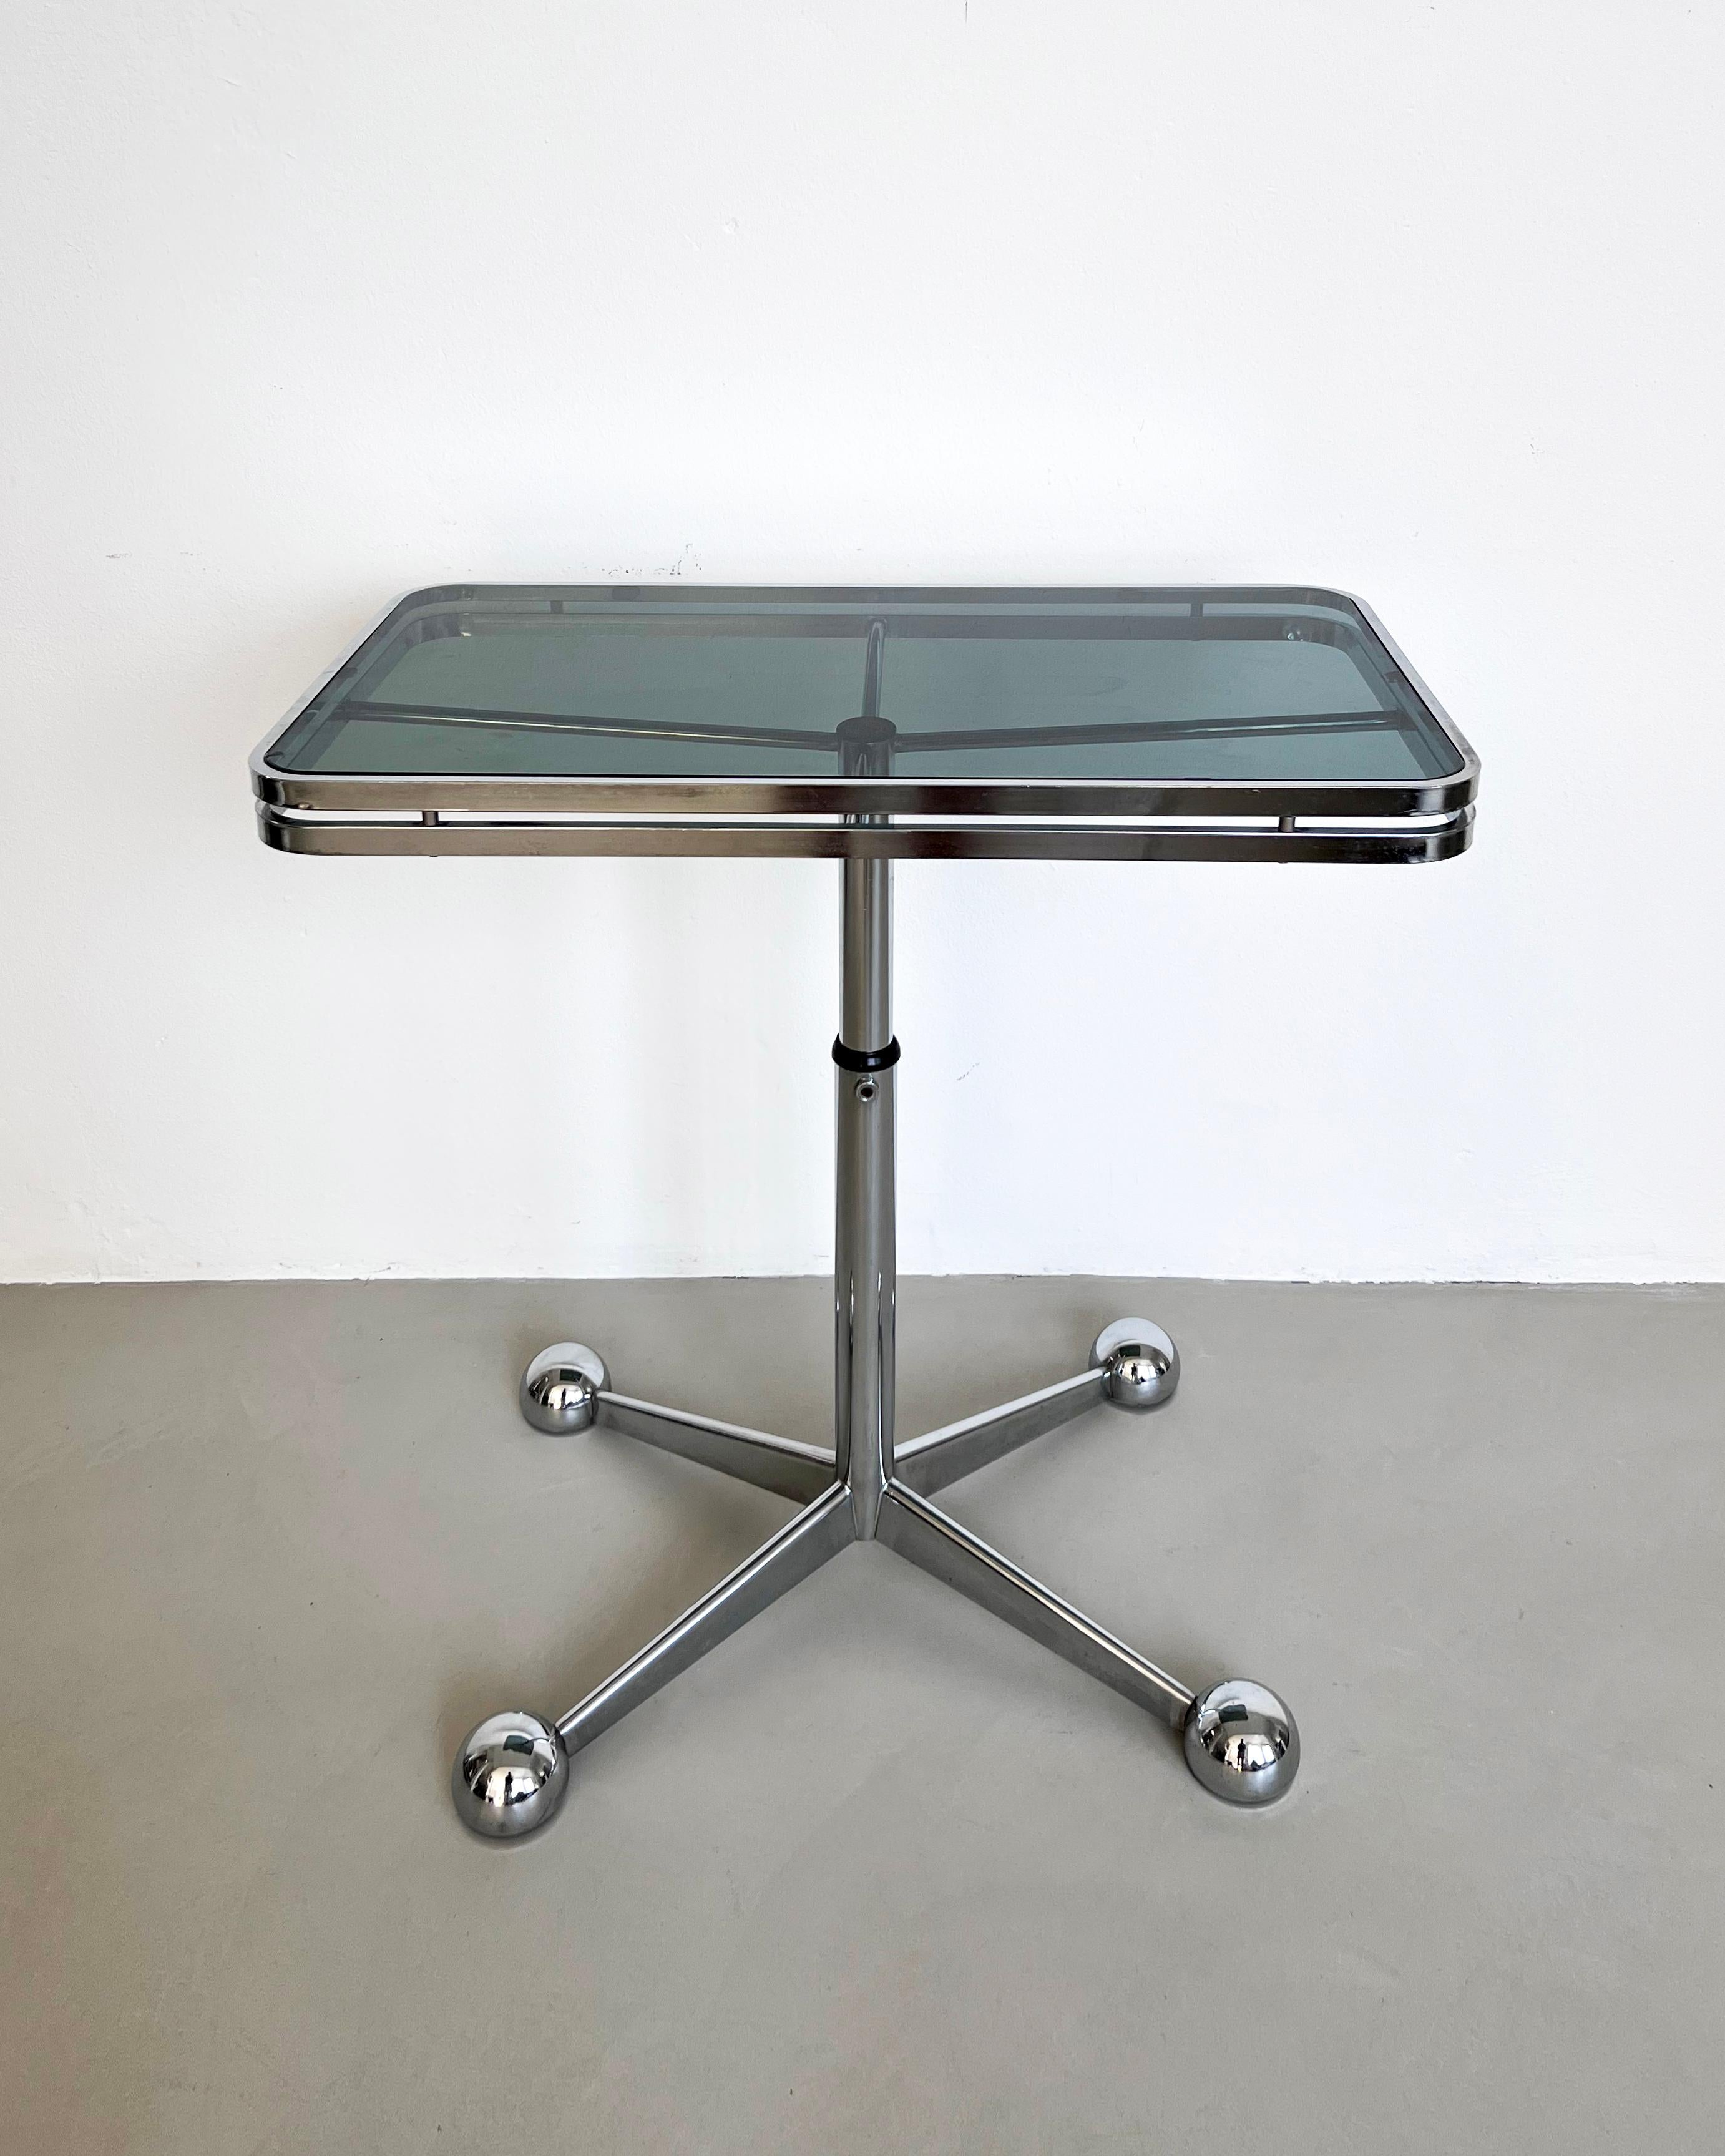 Vintage chromed metal and smoked glass telescopic adjustable table, made in Italy in the 1970s, Space Age period/style.

Labelled by famous furniture manufacturer Allegri, based in Parma, in Northern Italy, this table was originally intended as a TV